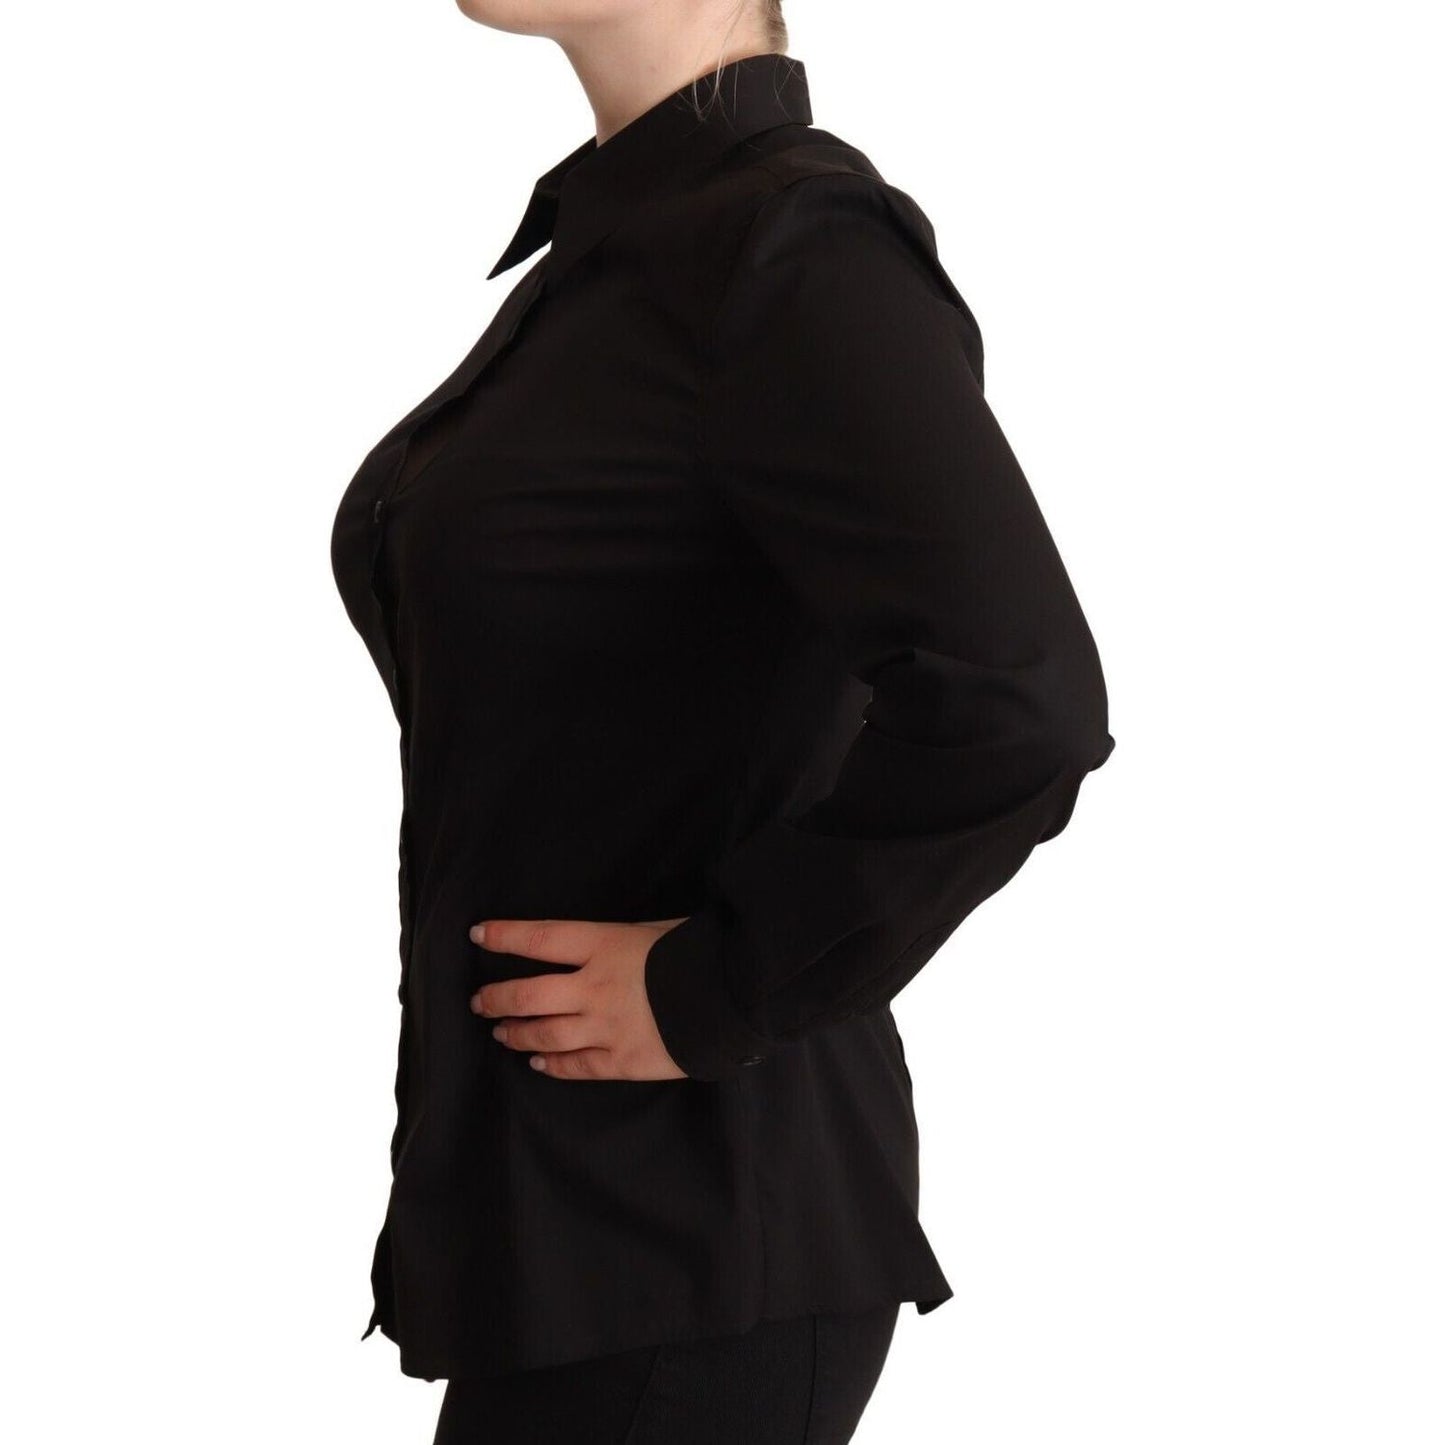 Dolce & Gabbana Elegant Black Cotton Blend Collared Top WOMAN TOPS AND SHIRTS black-cotton-collared-long-sleeves-shirt-top